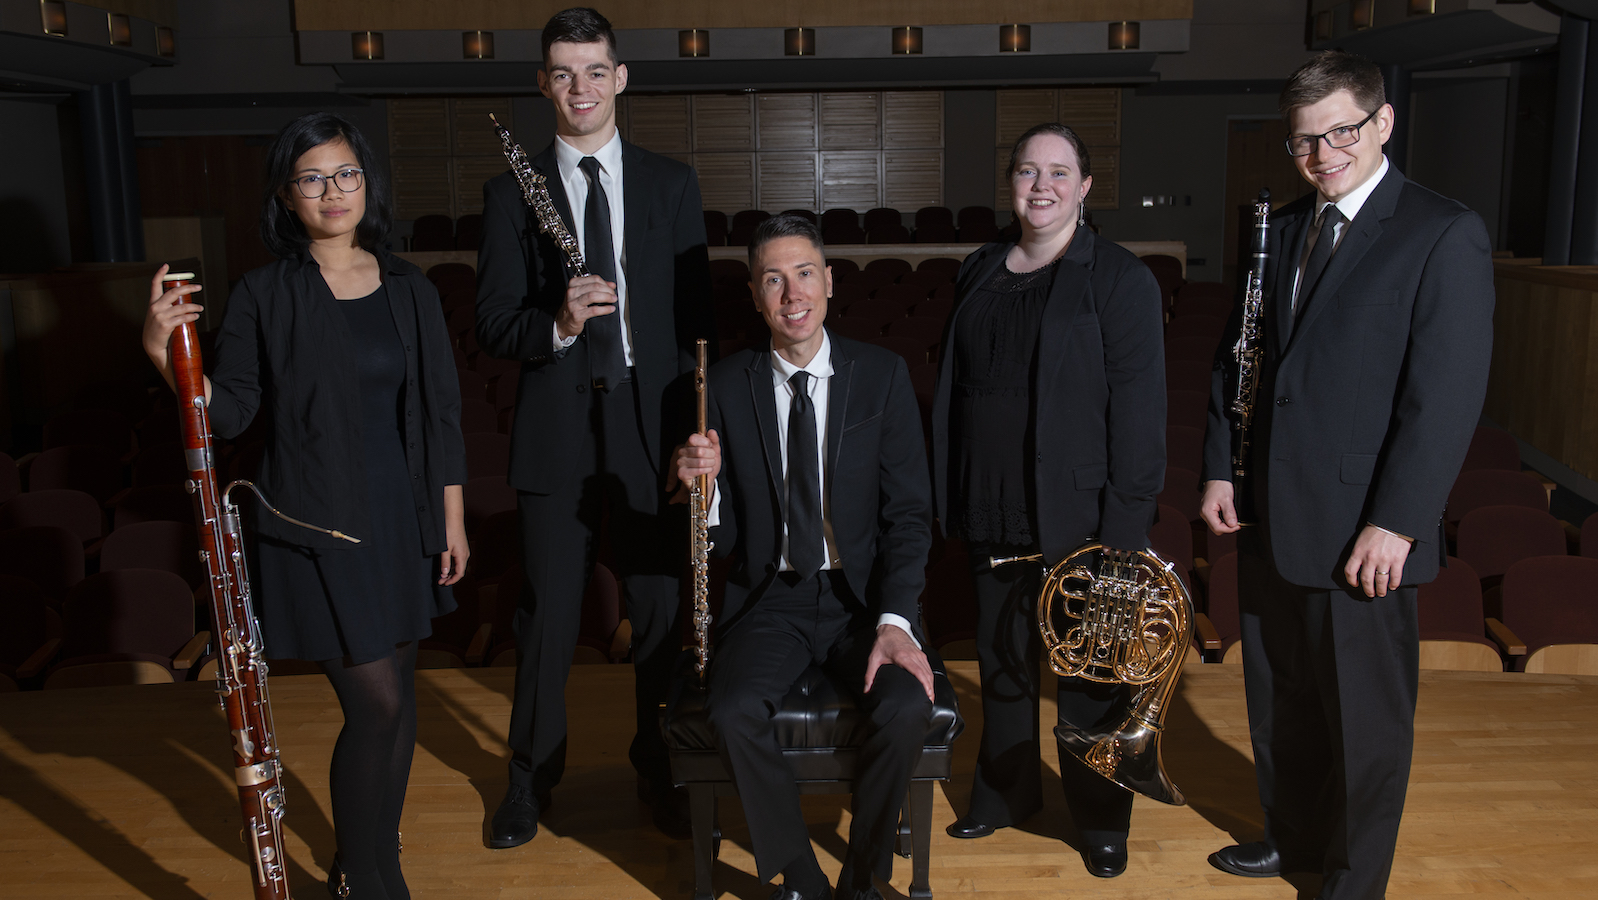  Woodwind quintet members holding instruments.